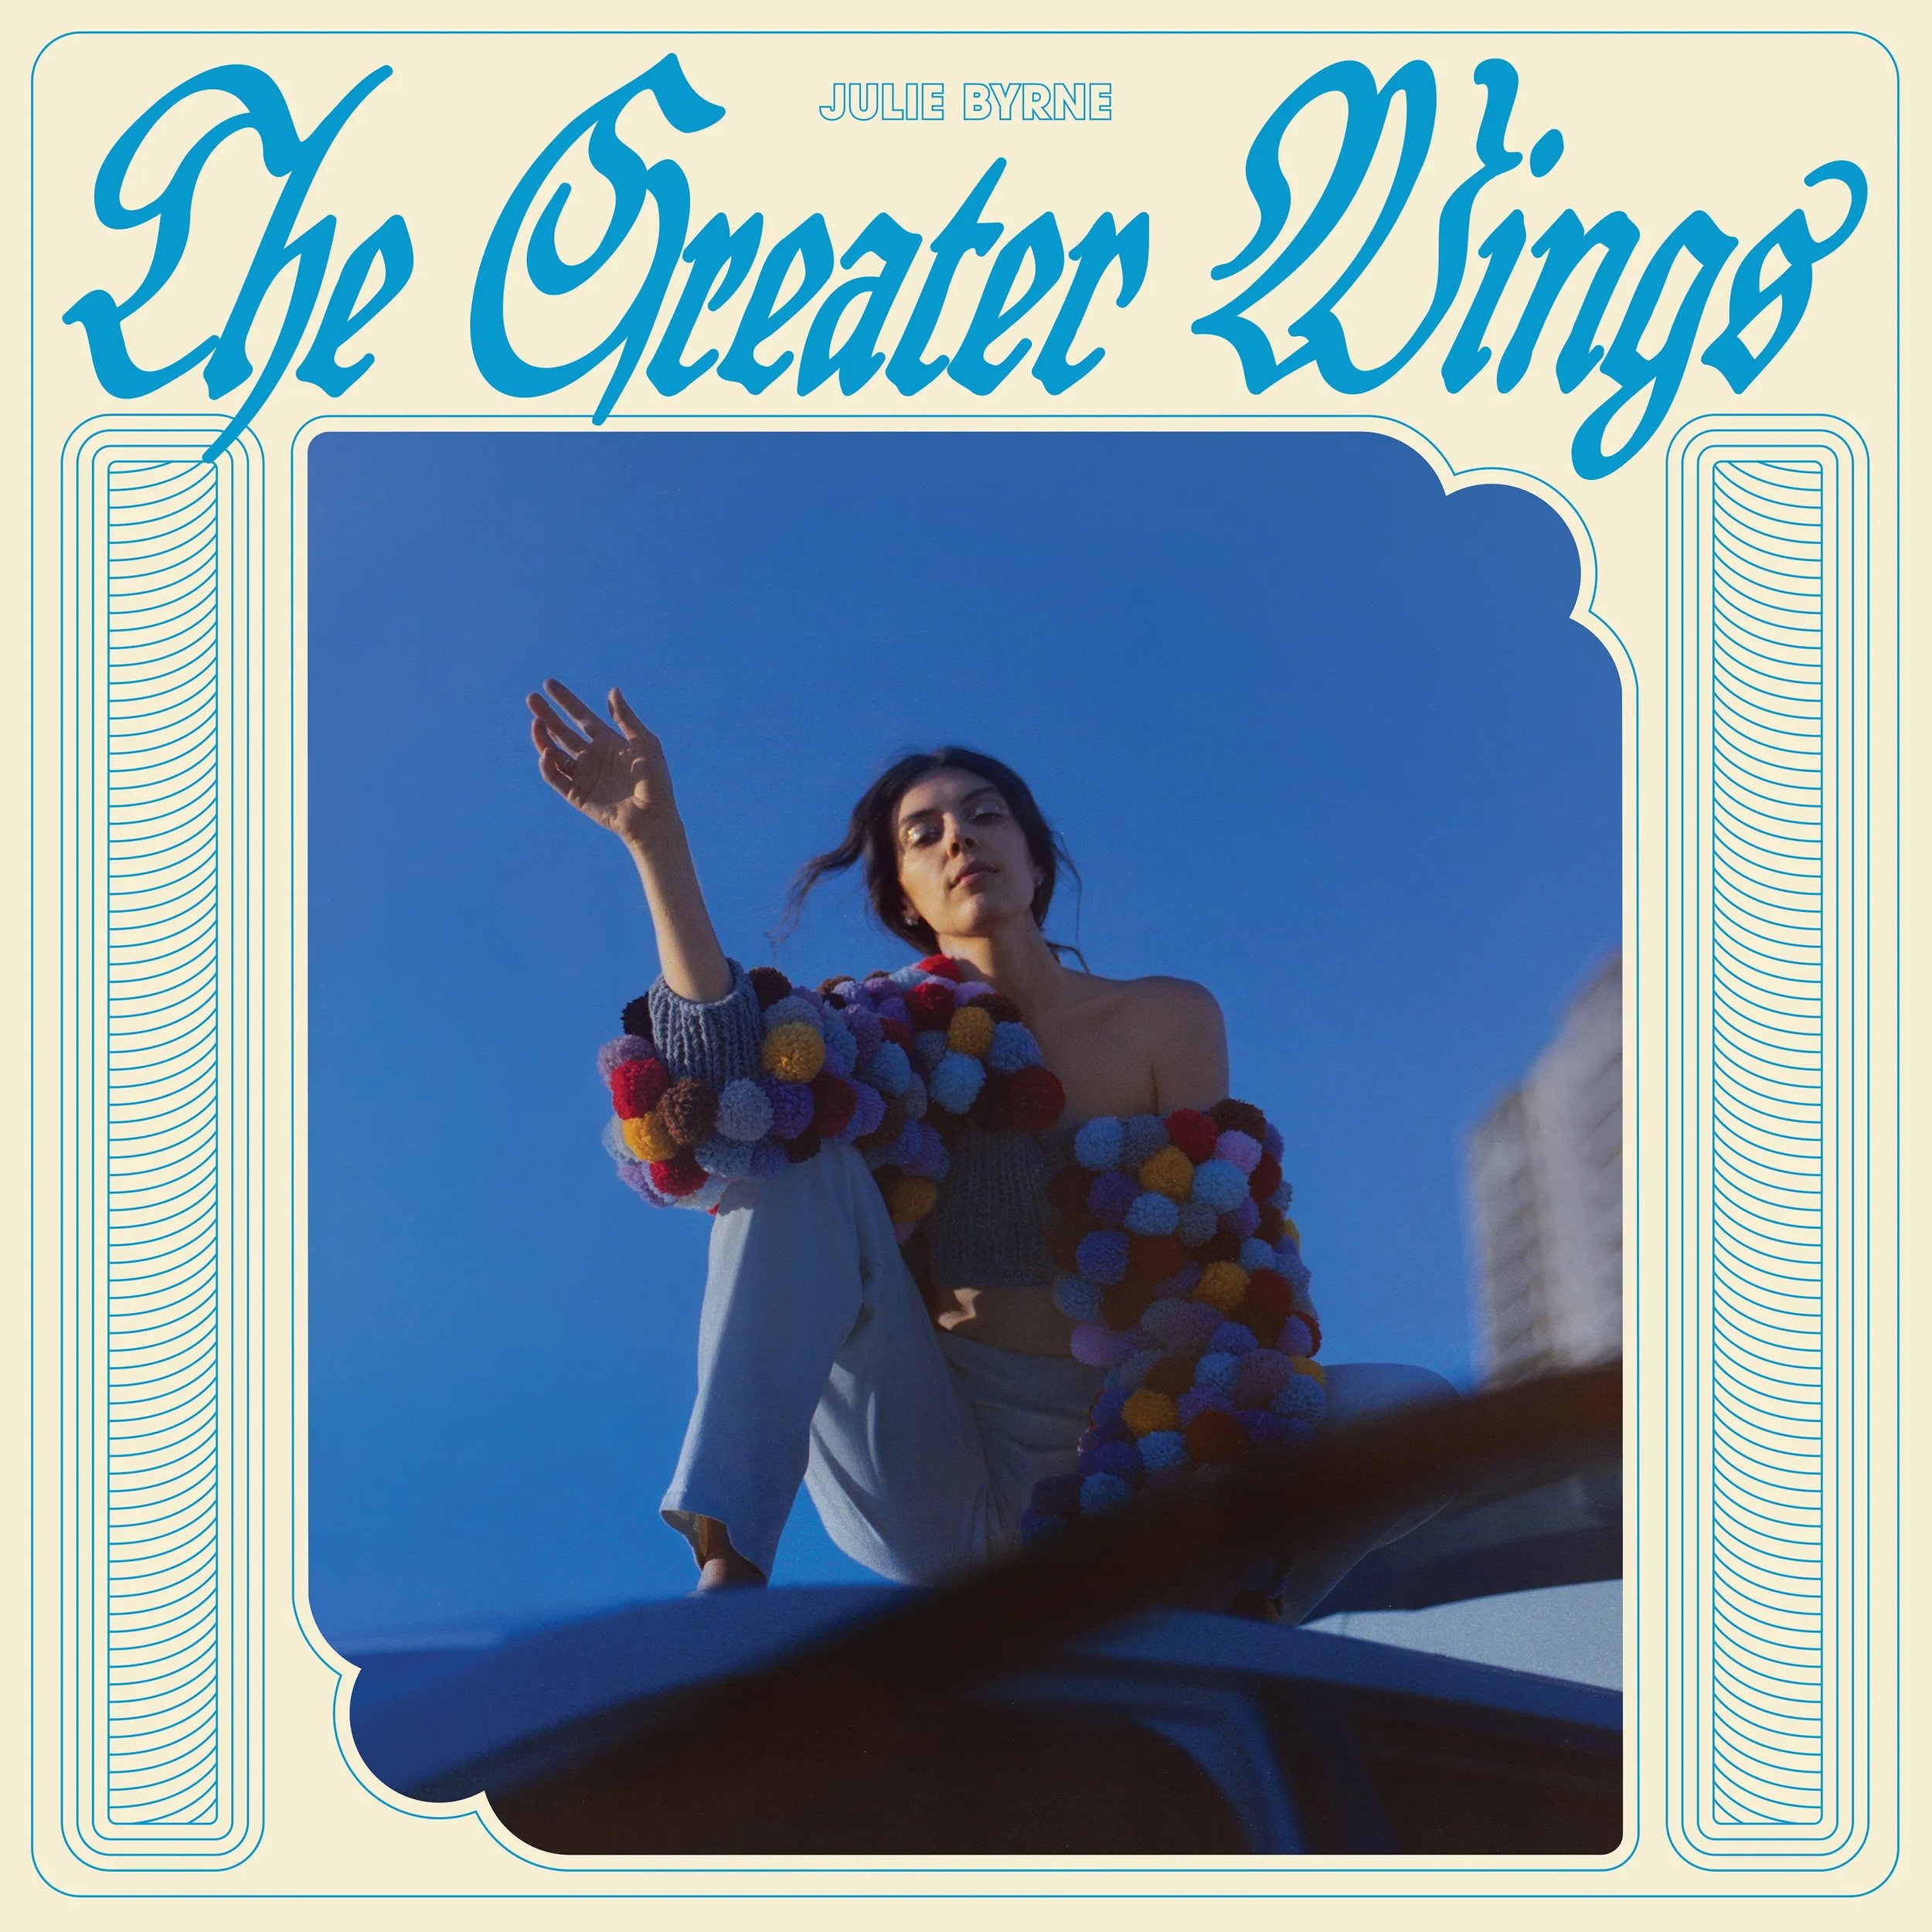 7. Julie Byrne - The Greater Wings